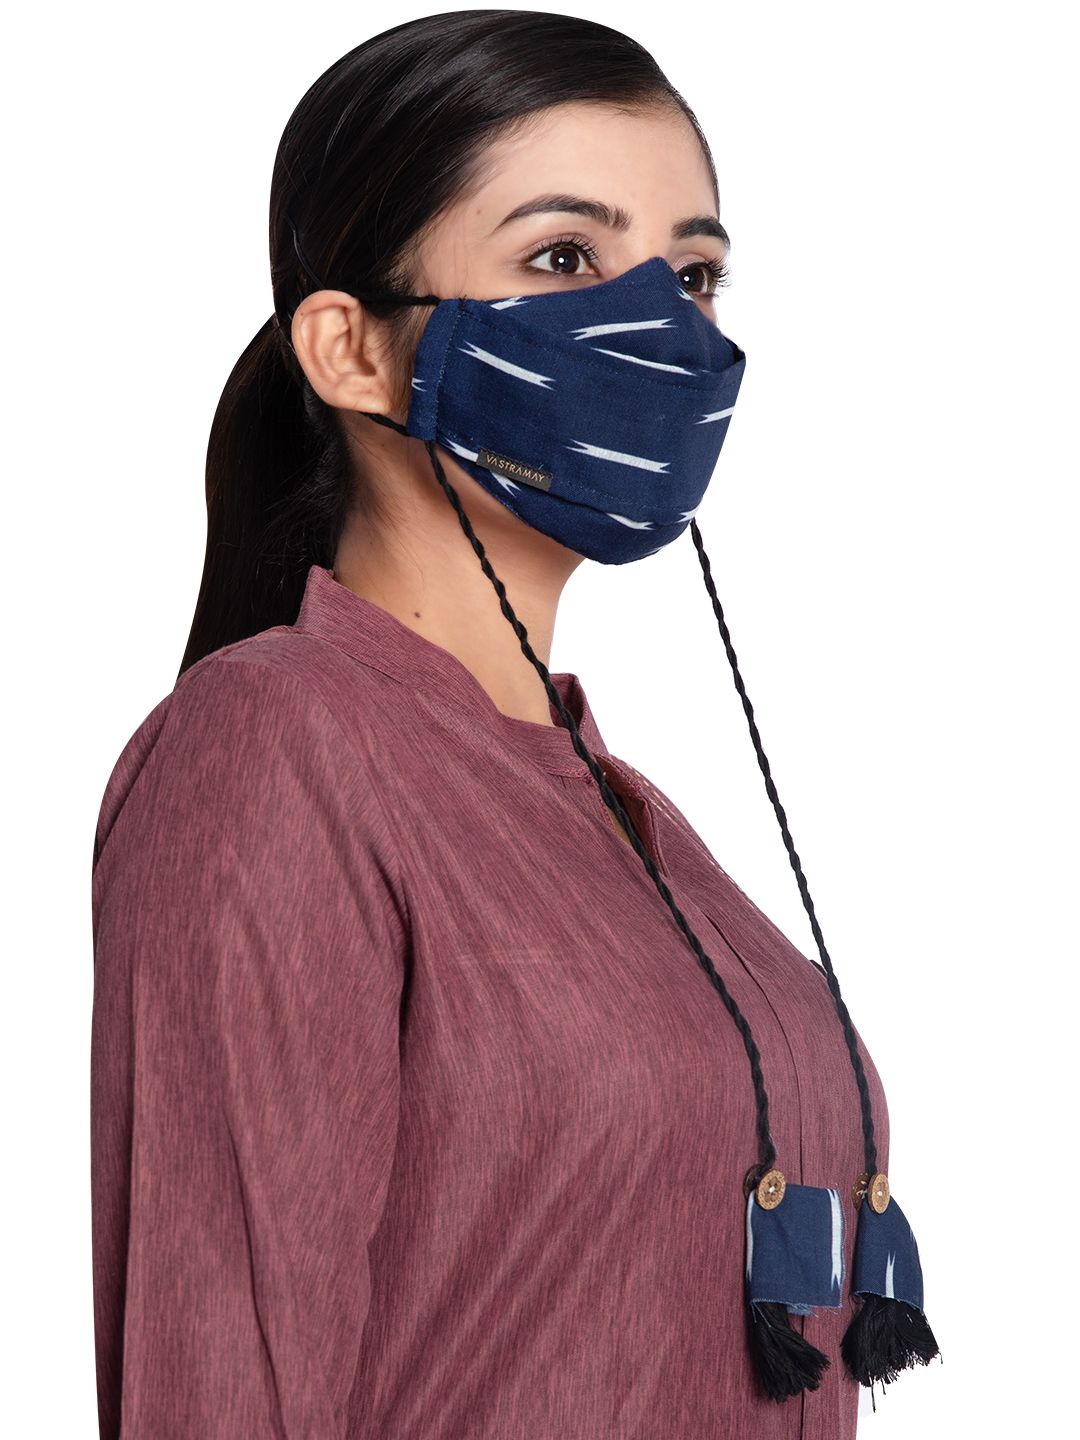 VASTRAMAY Unisex Blue 3-Ply Reusable Cloth Mask Price in India